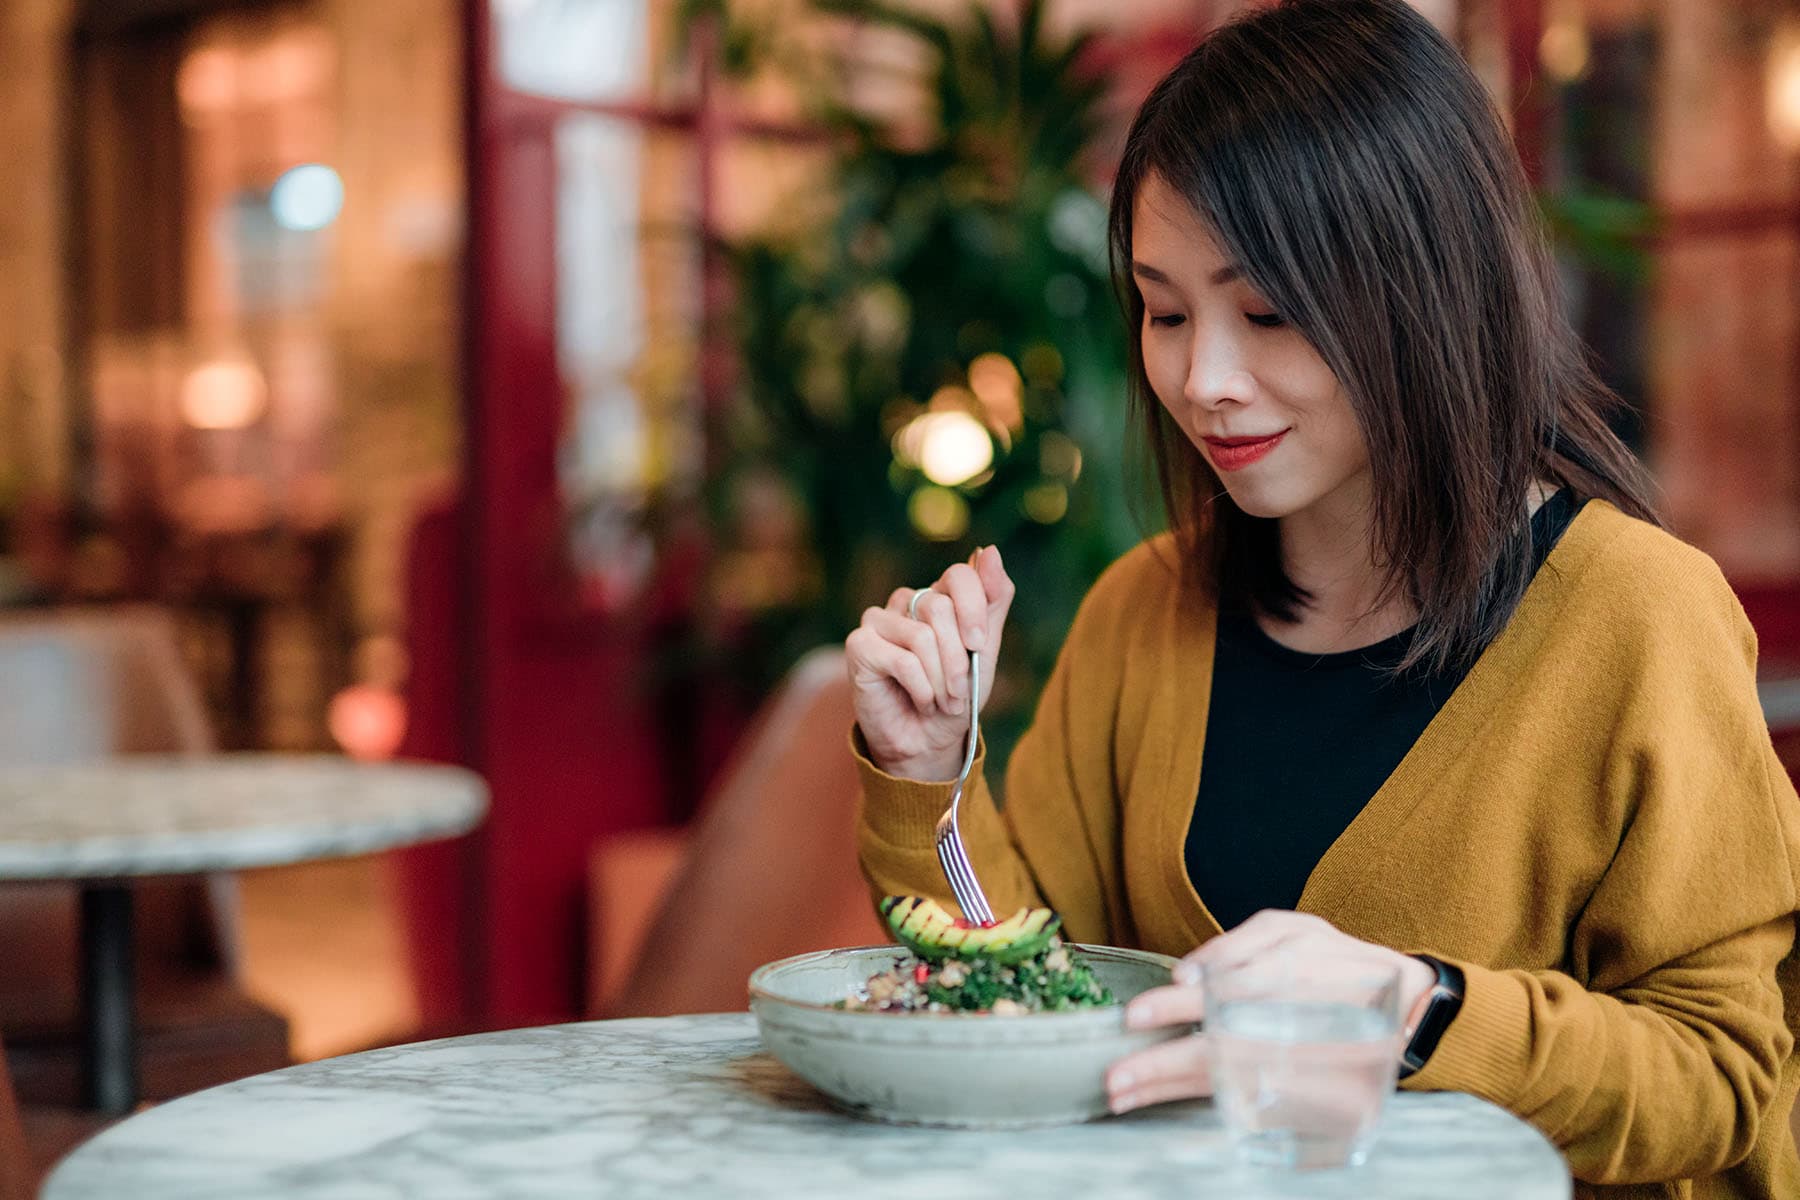 photo of woman eating a salad